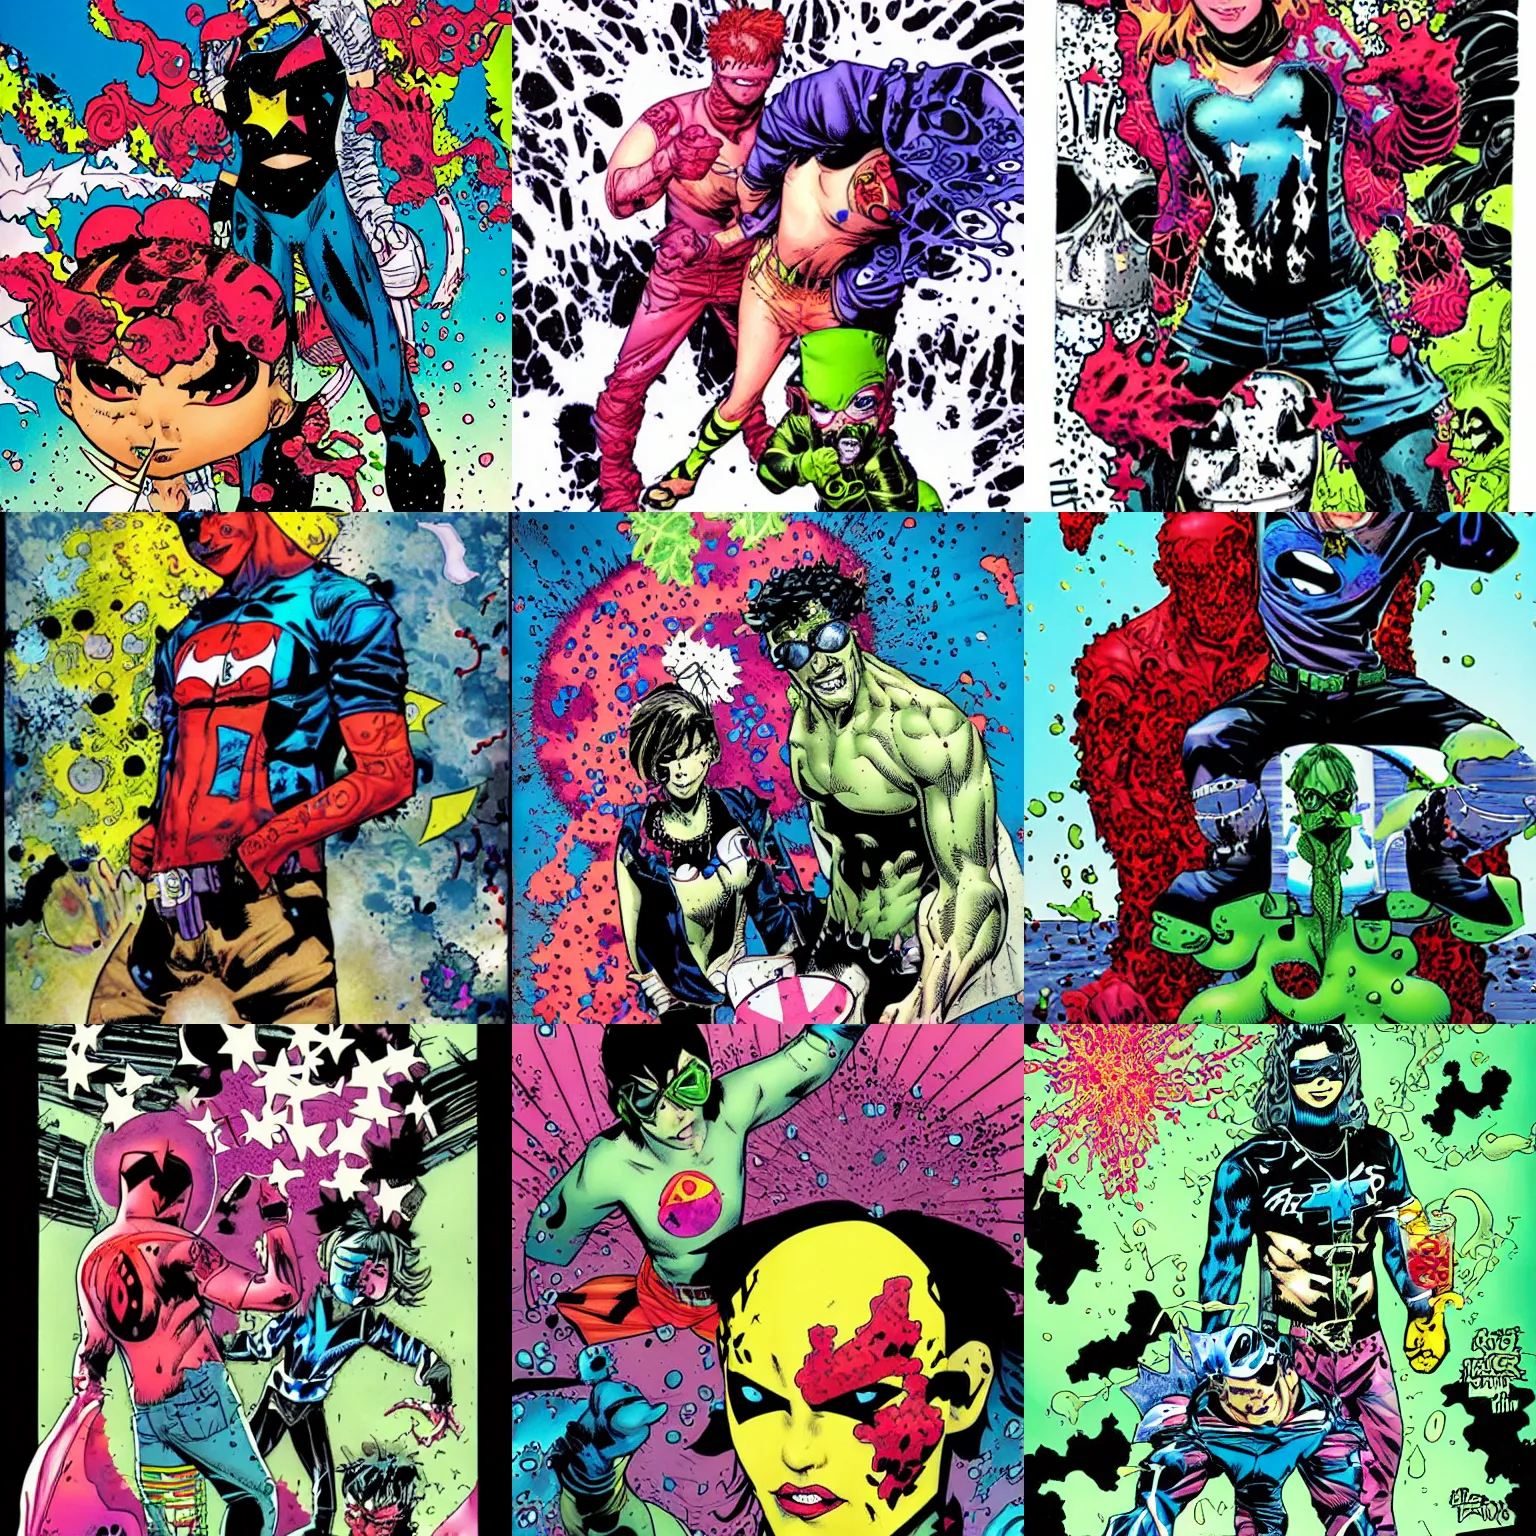 Prompt: acid splash and young hero with tatoo body and toxic superpower, by chris bachalo